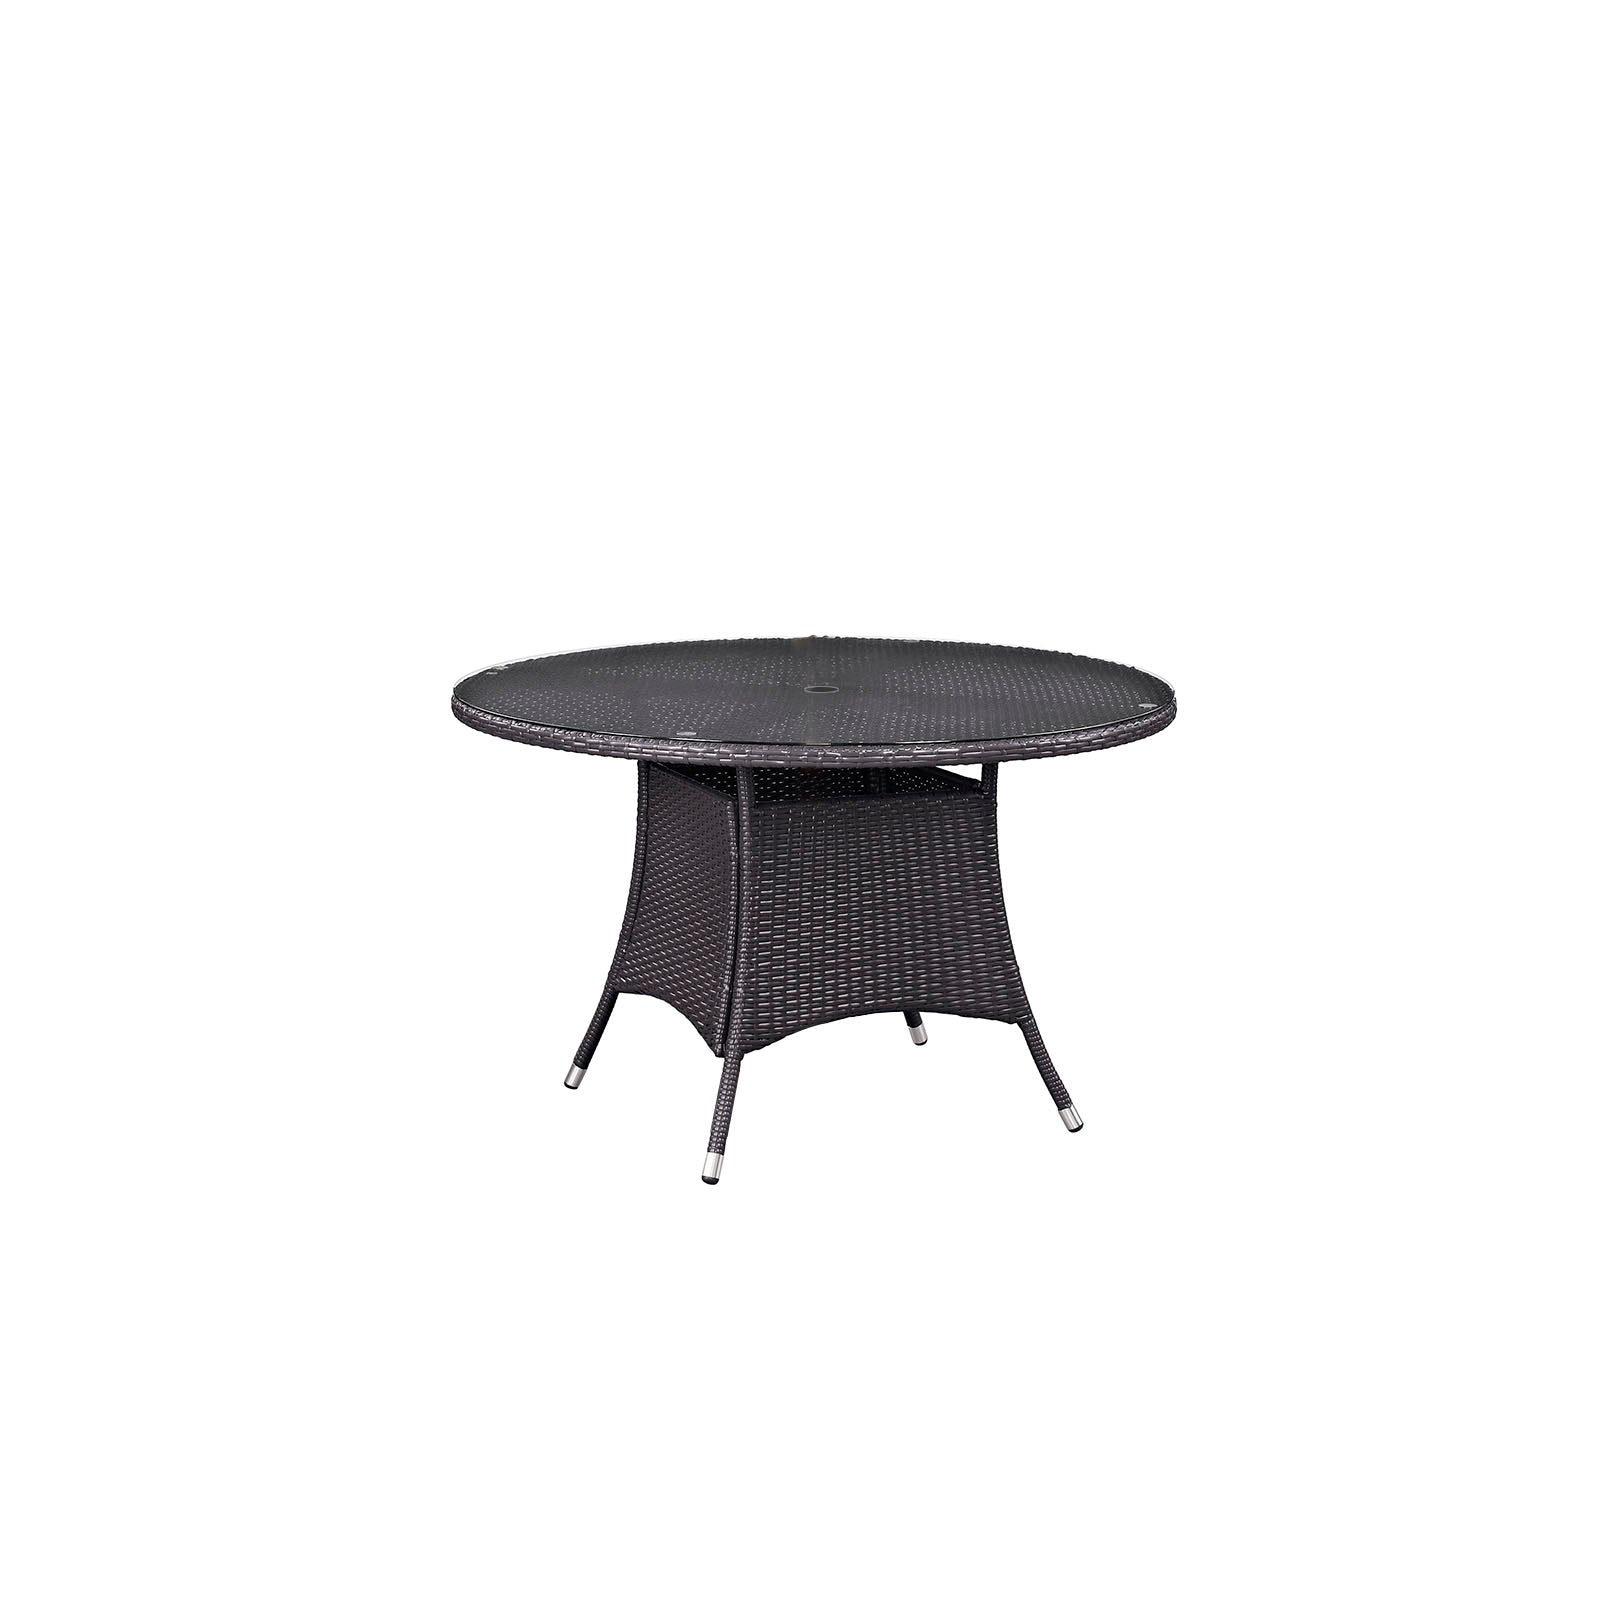 Modway Outdoor Dining Tables - Convene 47" Round Outdoor Dining Table Espresso